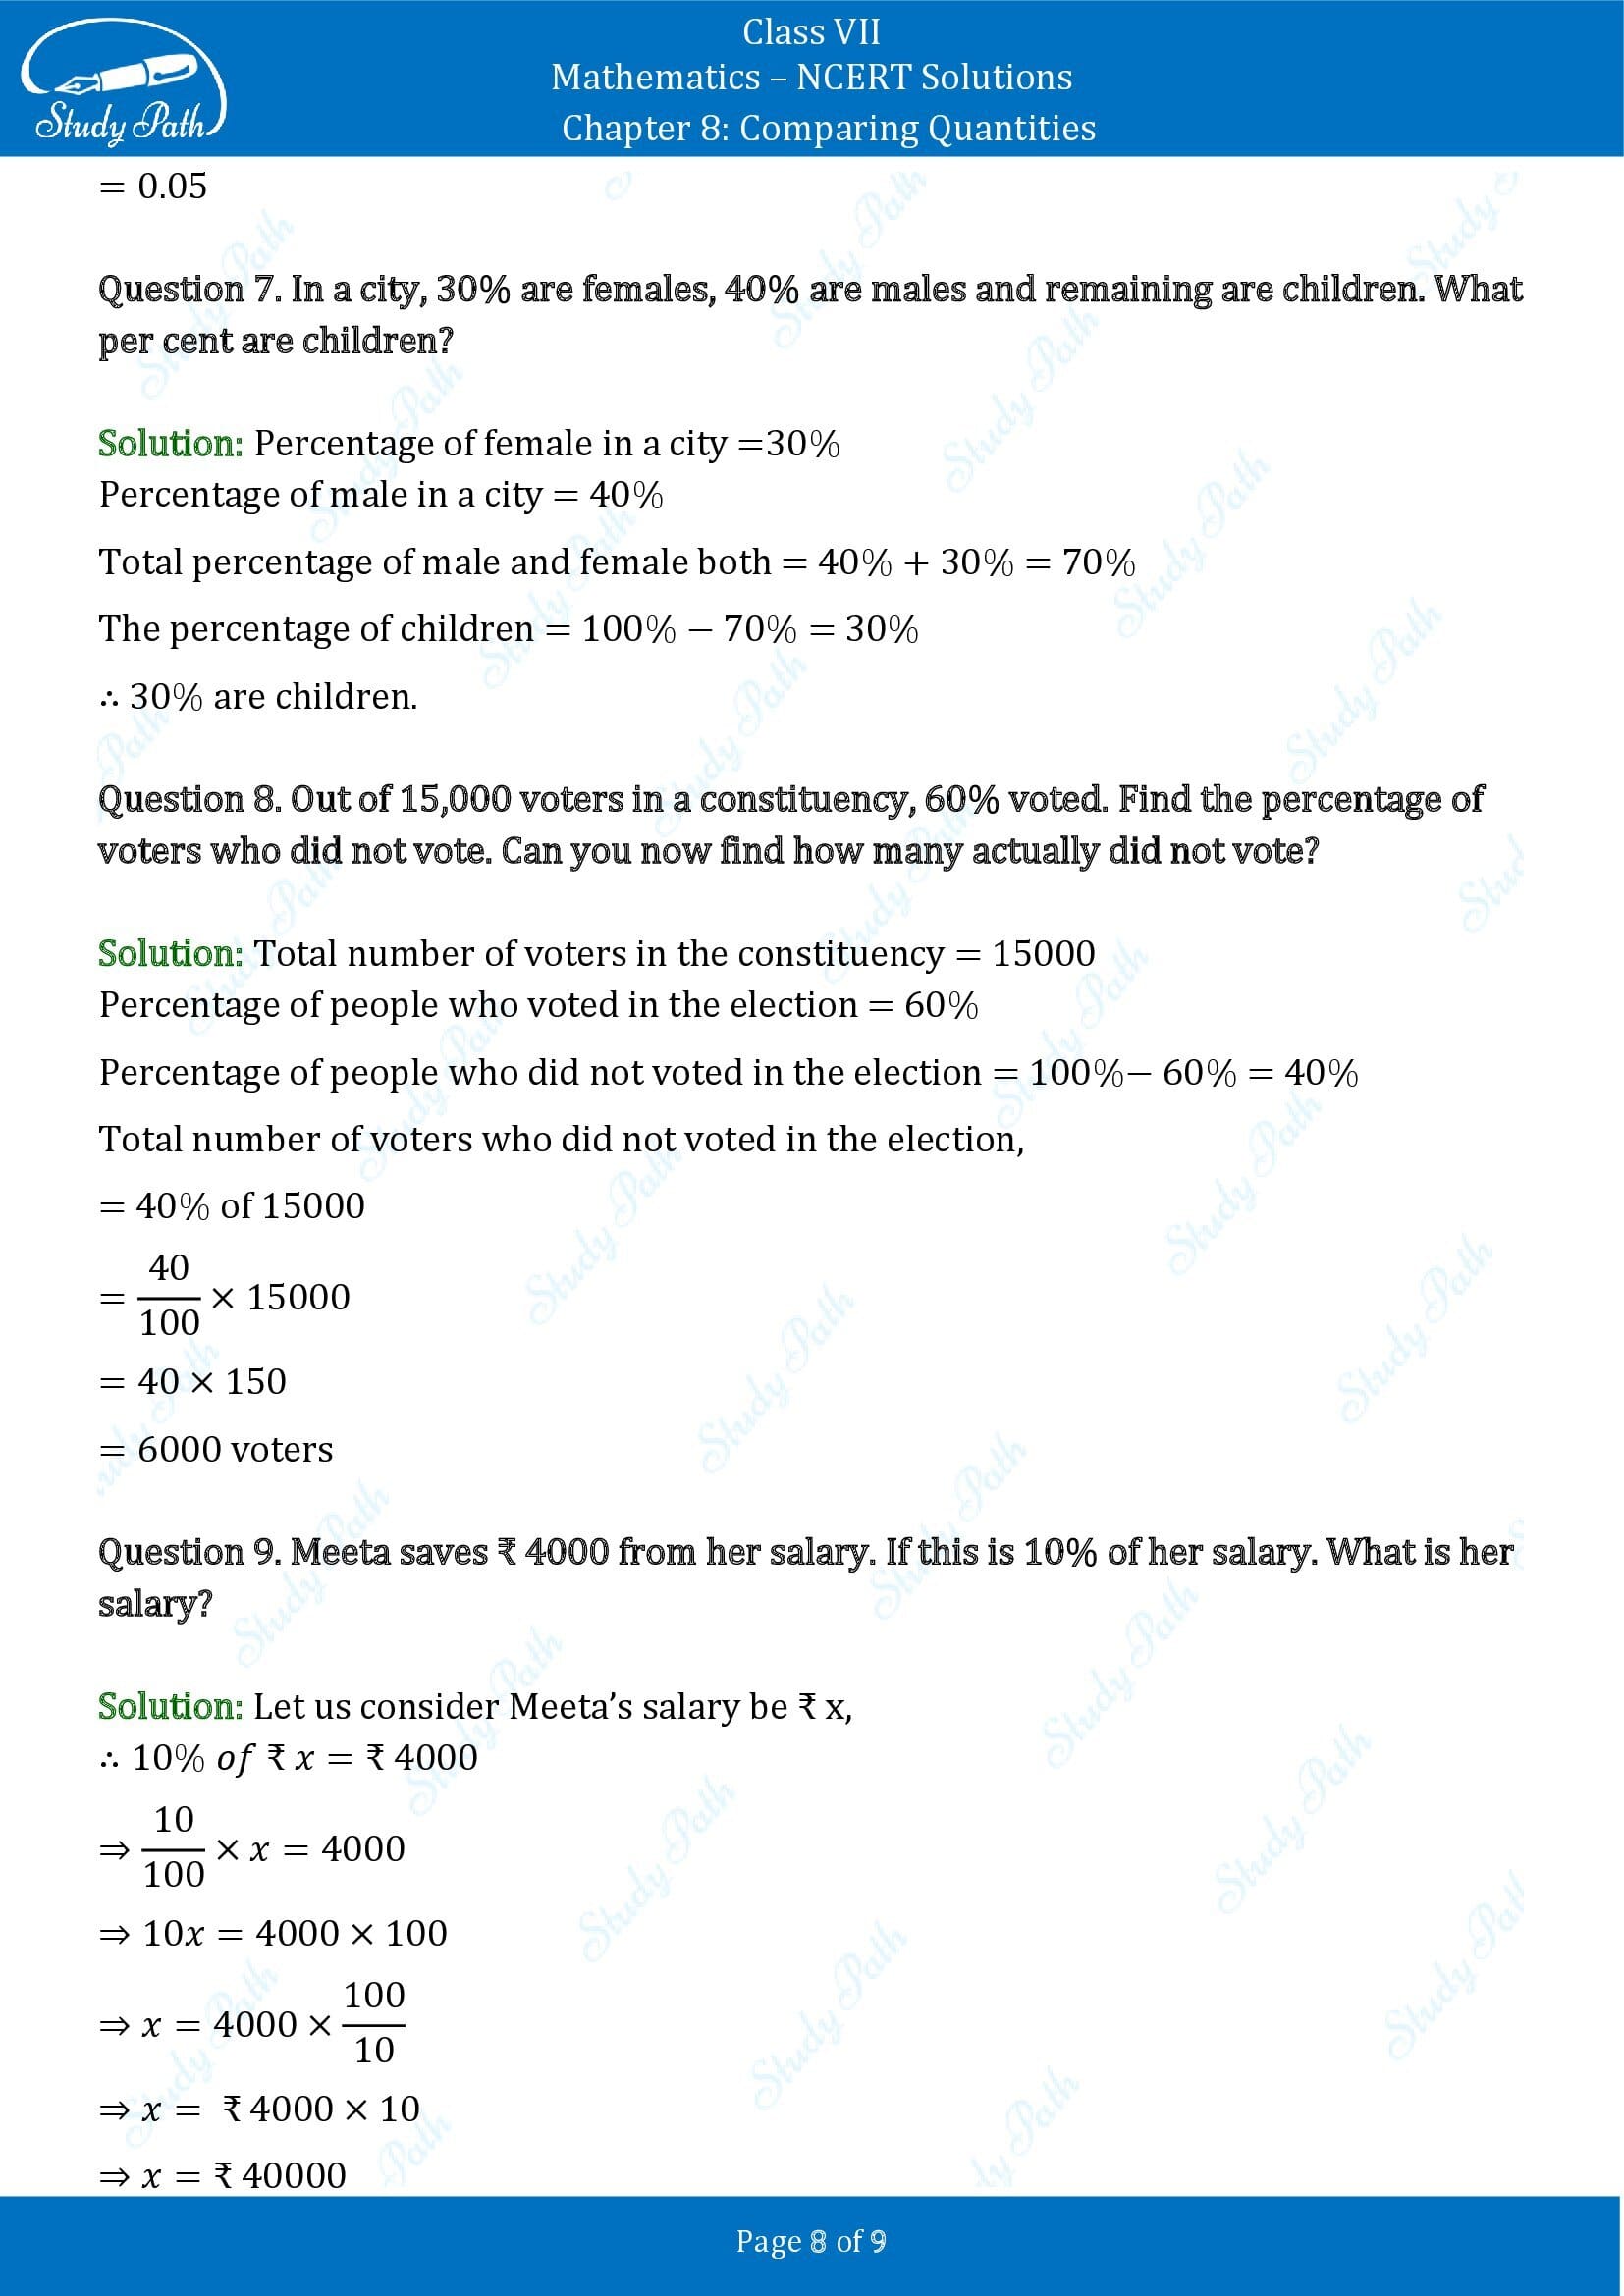 NCERT Solutions for Class 7 Maths Chapter 8 Comparing Quantities Exercise 8.2 00008